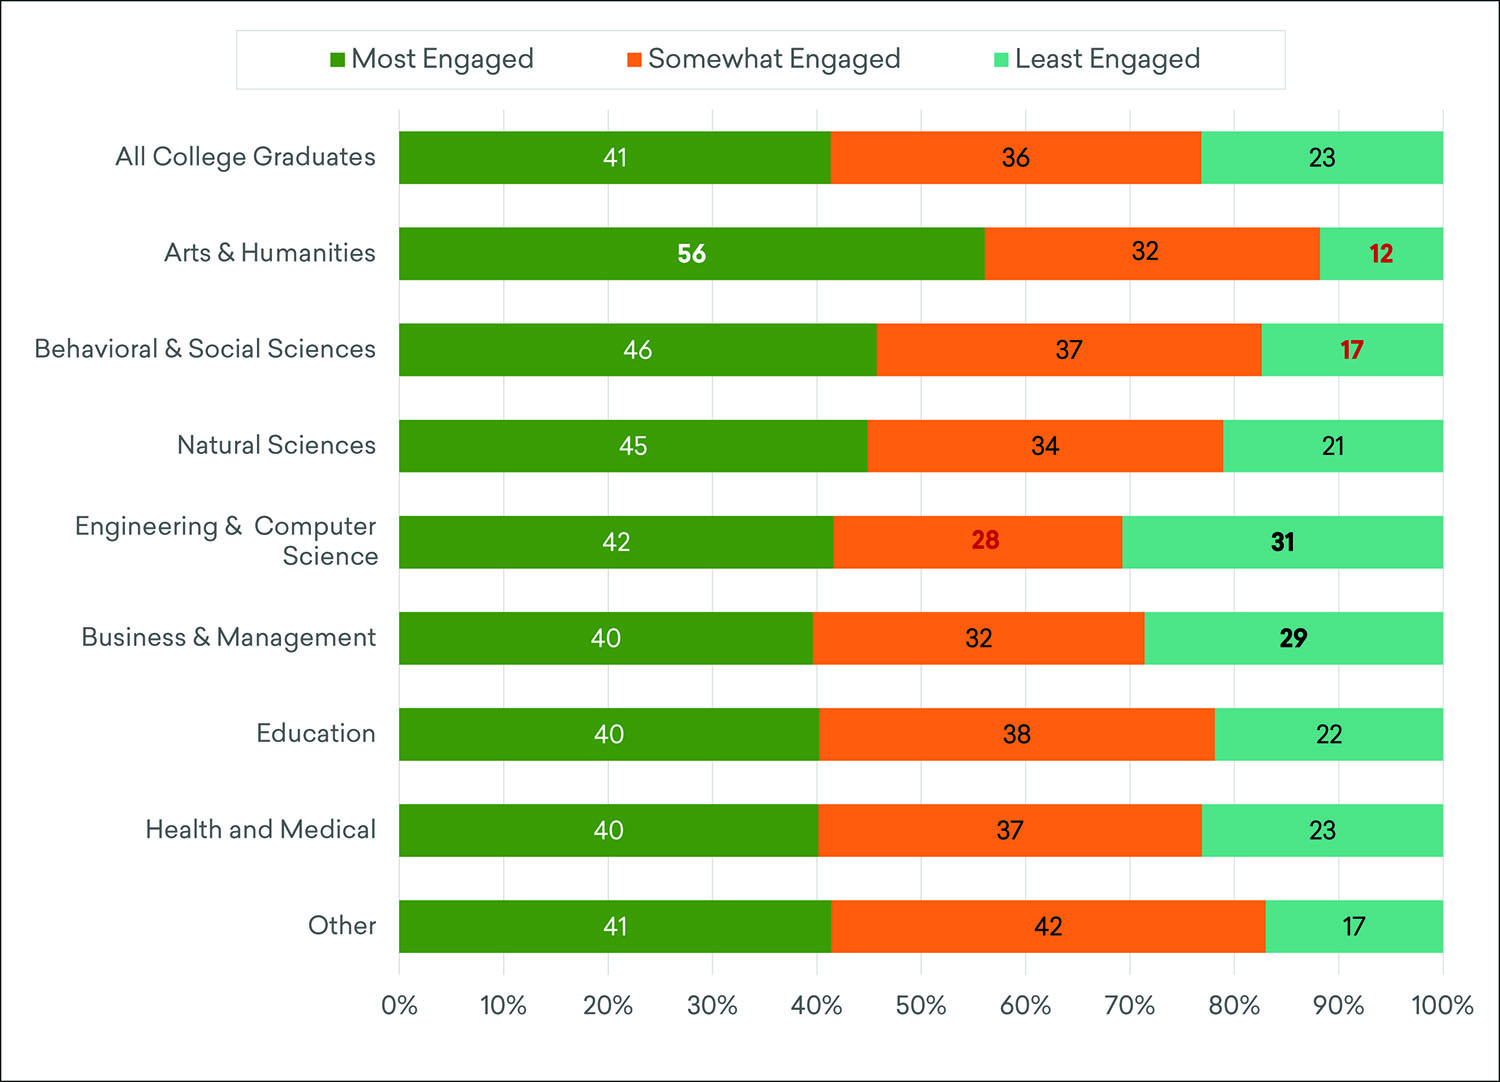 Estimated Distribution of College Graduates Across Levels of Engagement with the Humanities in the Previous 12 Months, by Undergraduate Major, Fall 2019*